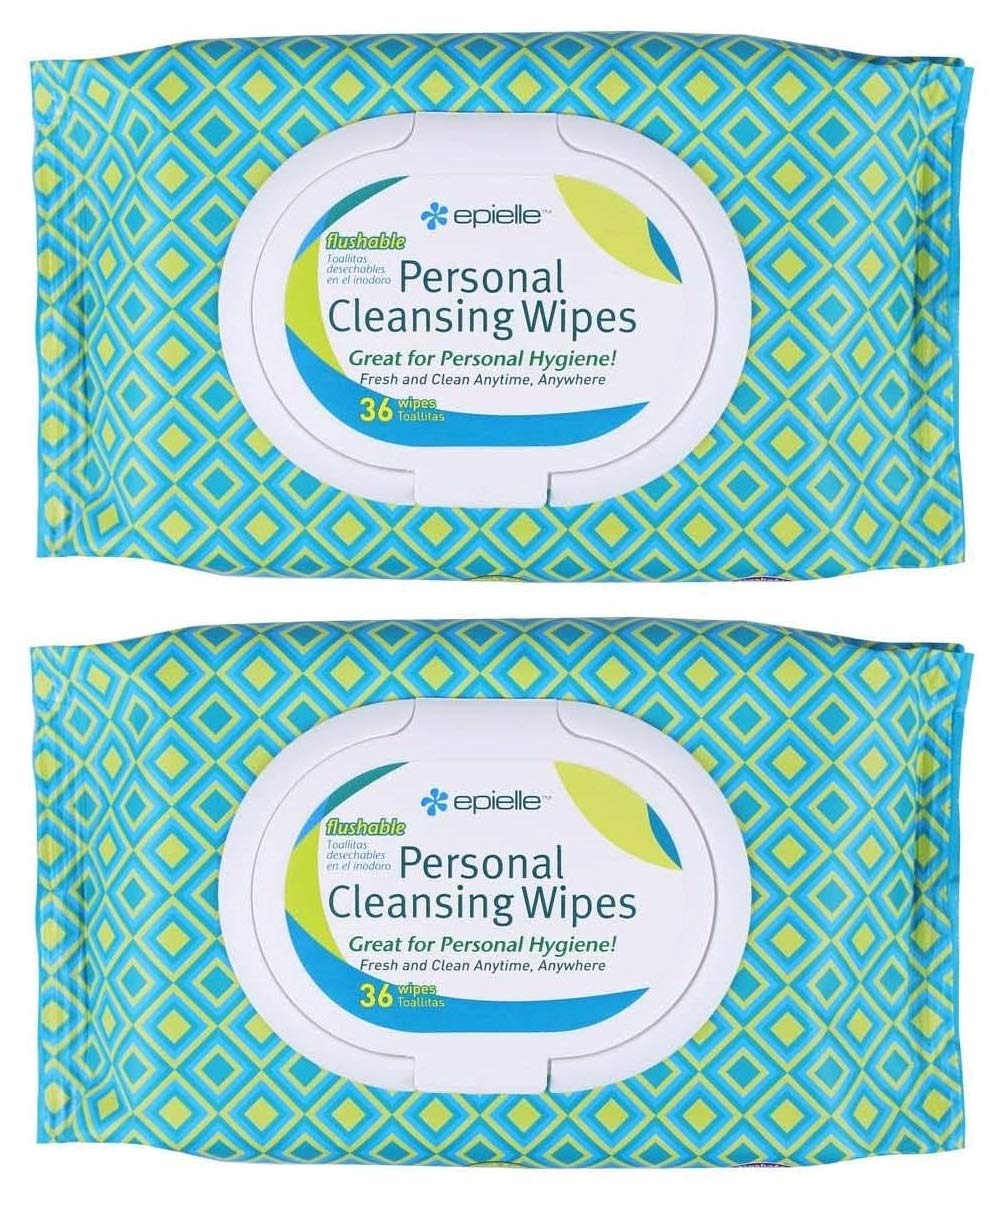 [Australia] - Epielle Personal Cleansing Wipes with Natural Ingredients - Flushable Wet Wipe Tissues Towelettes Travel Size, Daily Use, Gentle - 36ct (Sheets) per pack, Total 2 packs Toilet Paper Replacement 36ct Wipes (2pk) 